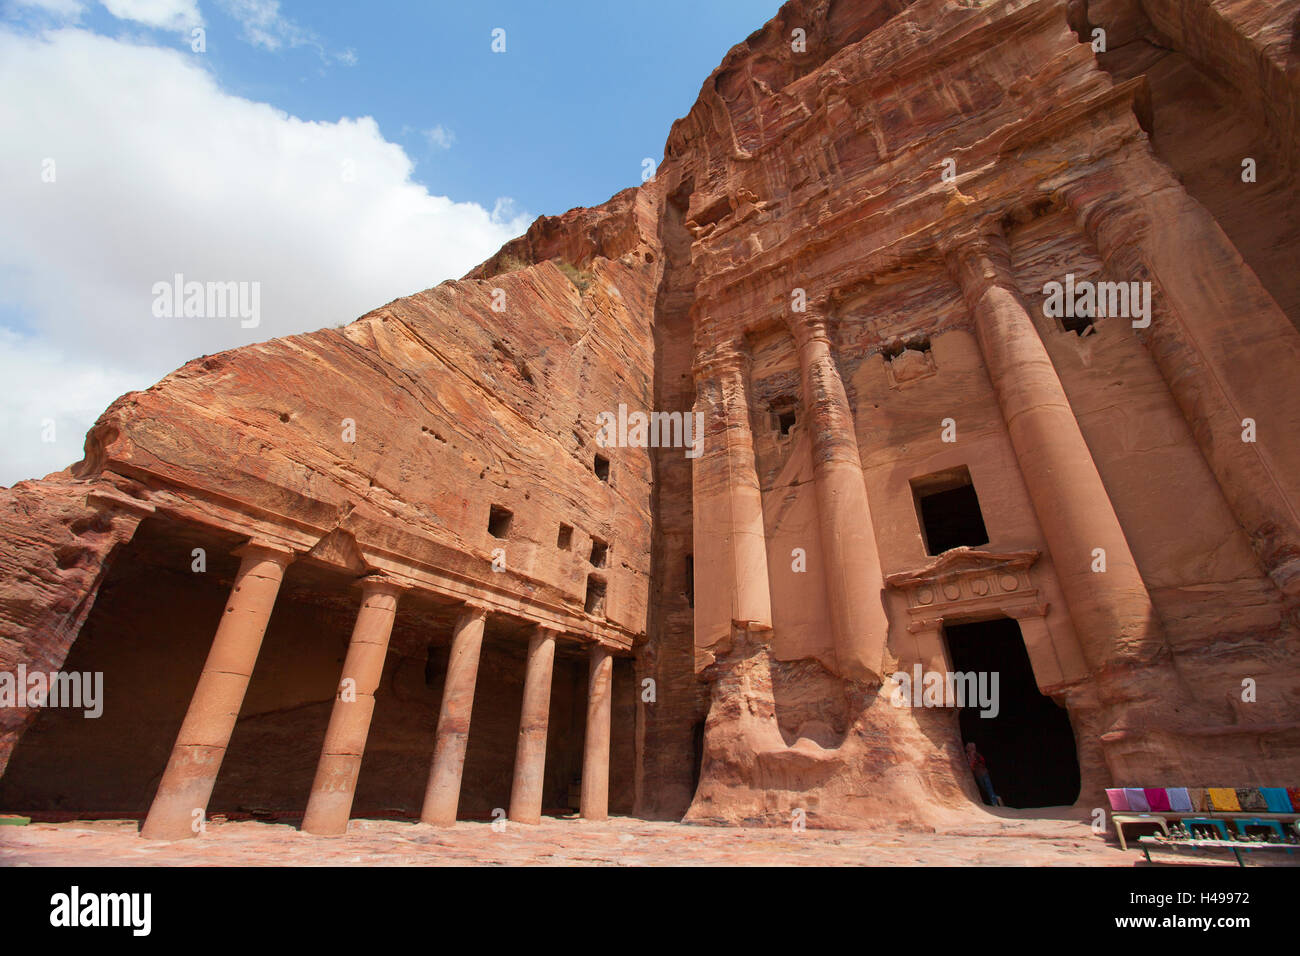 The 'Urn Tomb', one of the Royal Tombs of the Nabatean lost city of Petra, Jordan, Middle East. Stock Photo